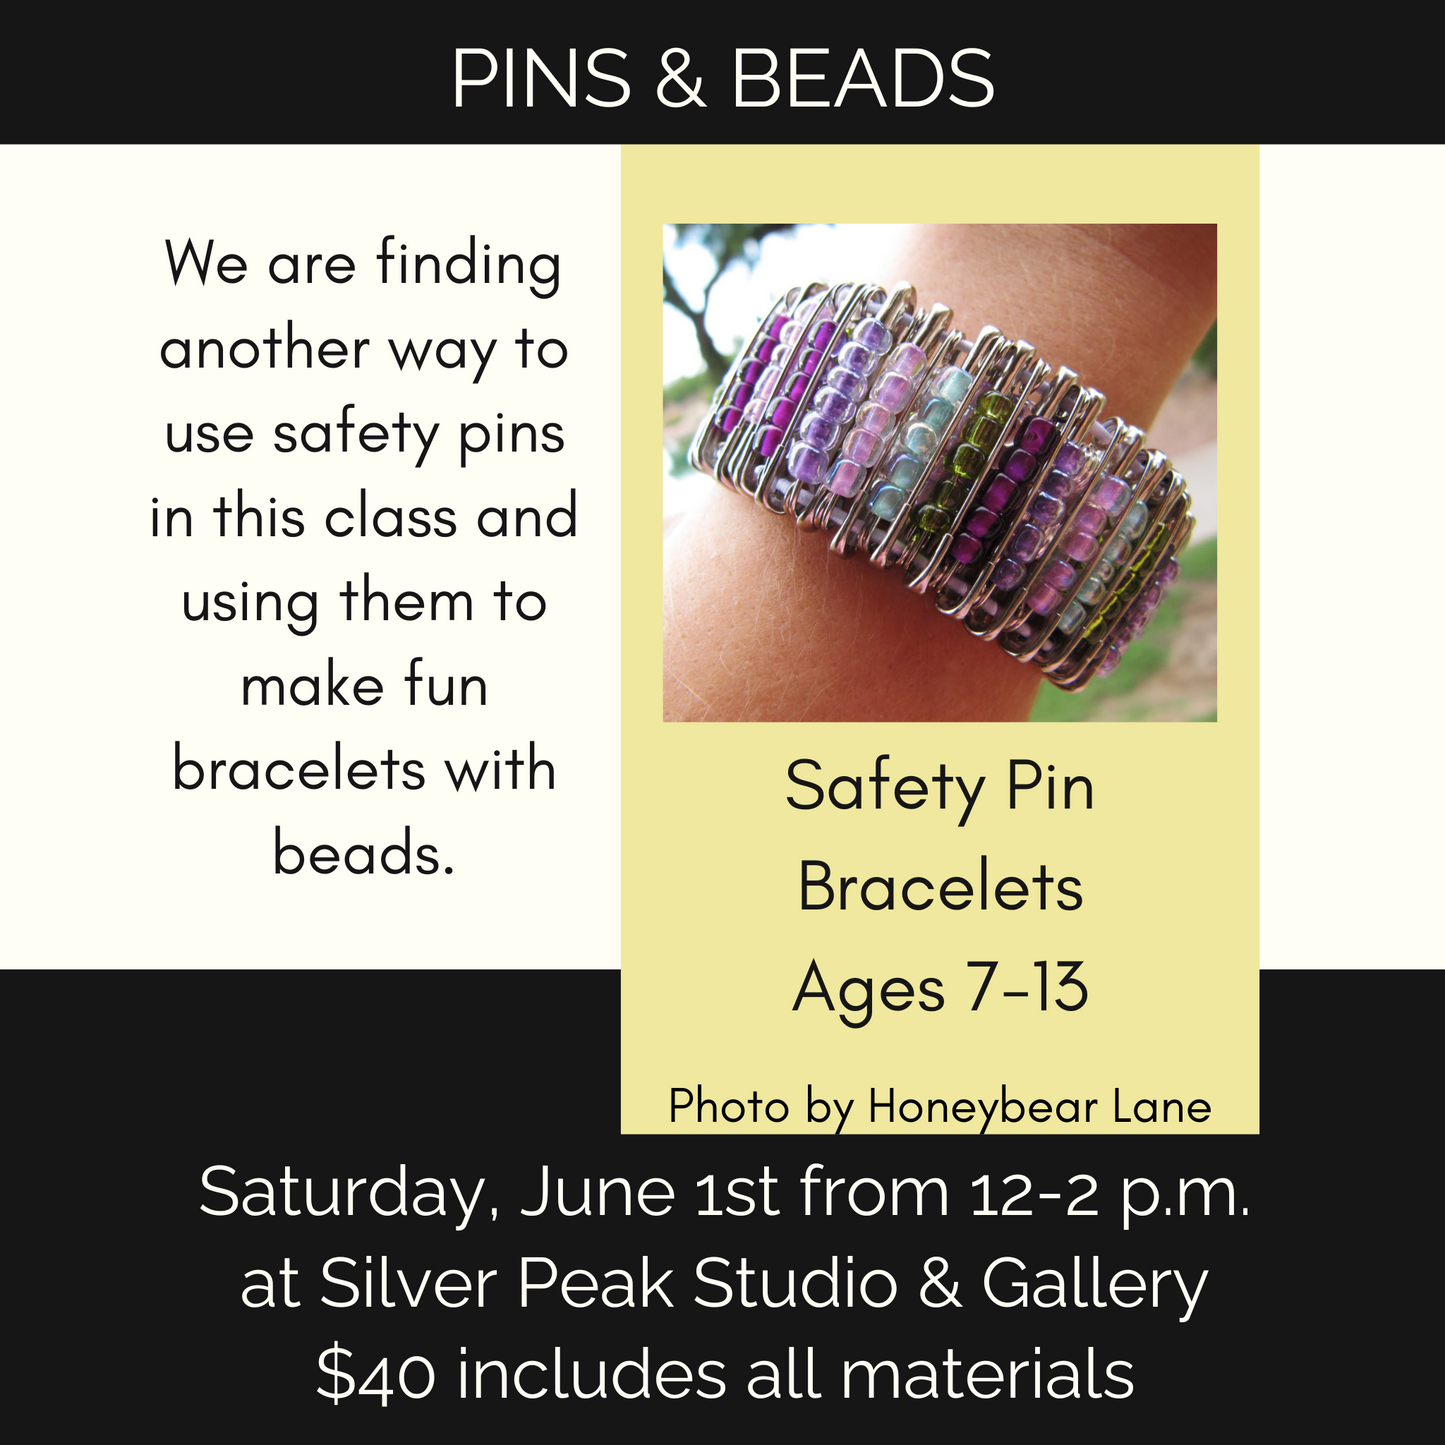 Pins & Beads: Ages 7-13: June 1st